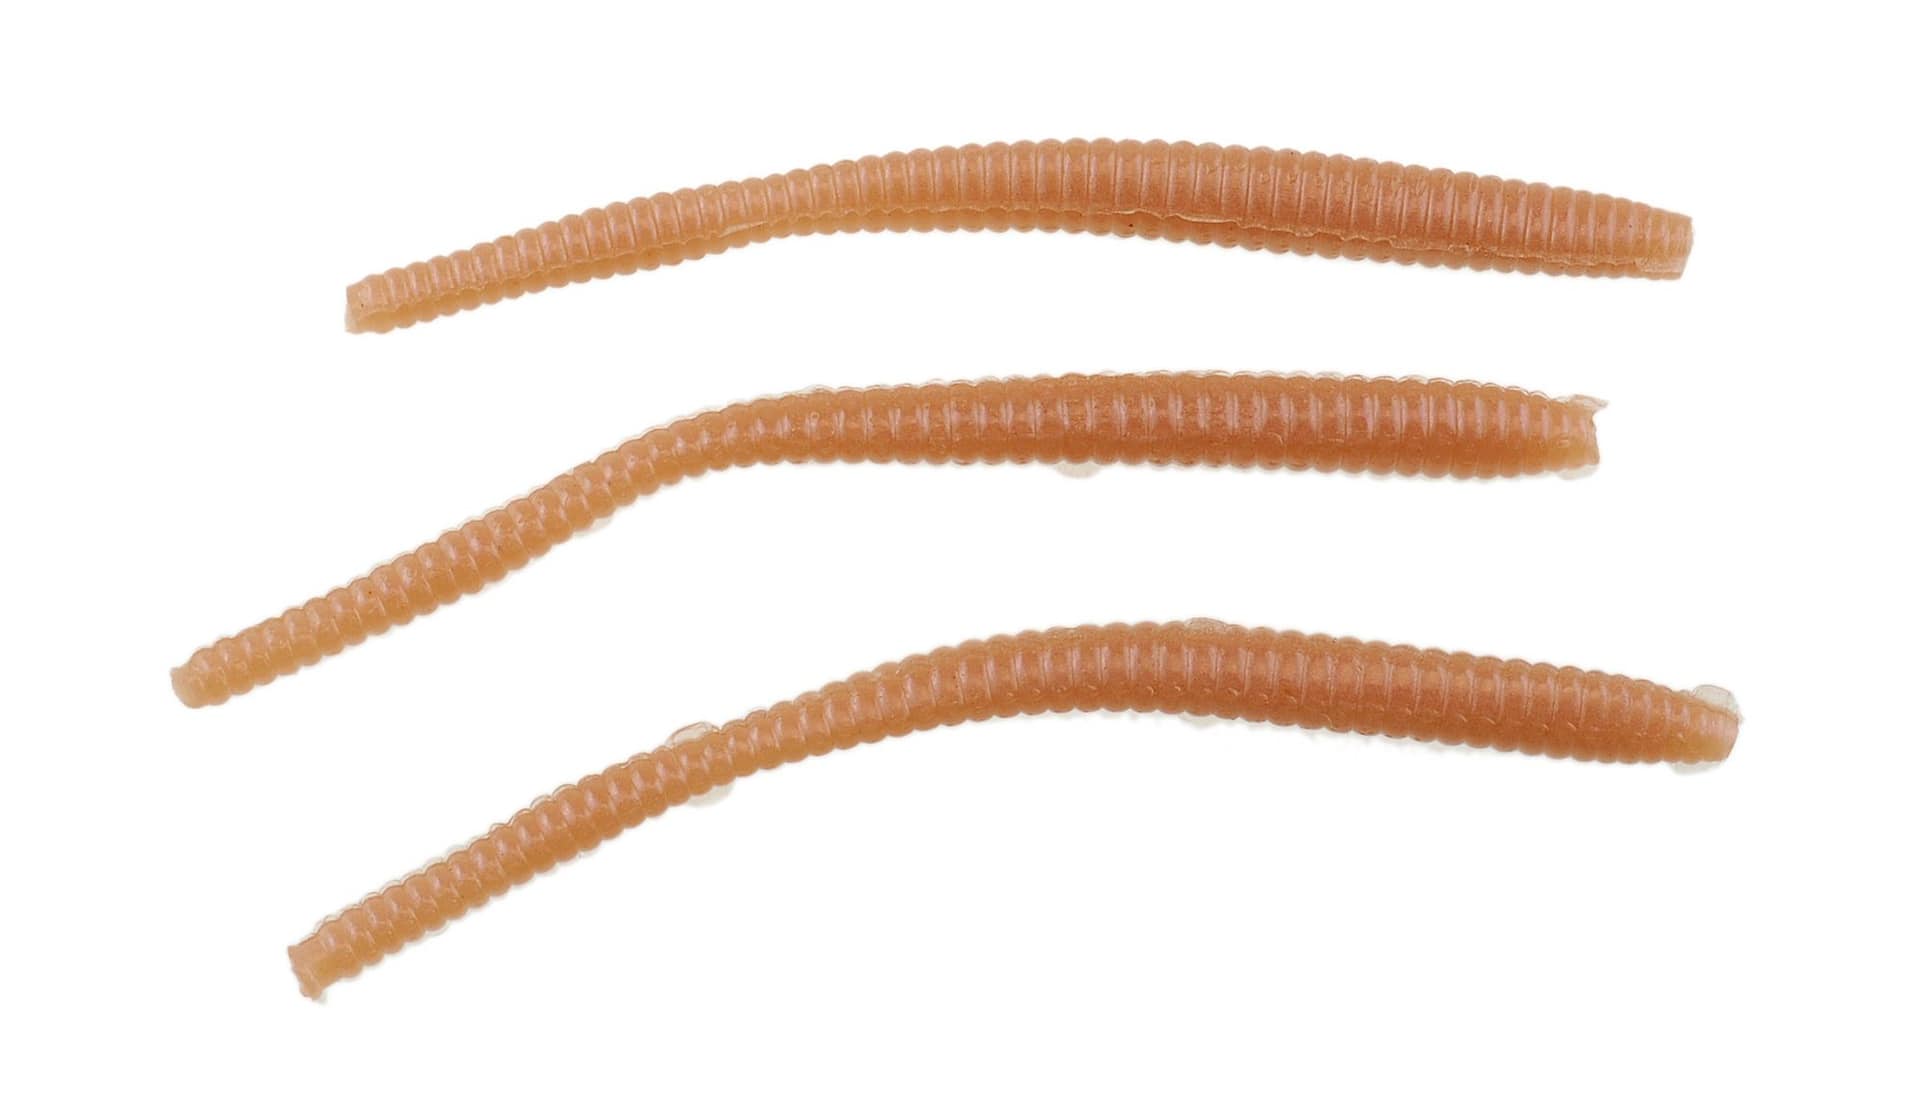 Artificial Fishing Worms Night Crawlers, Trout Worms, 10cm Worm